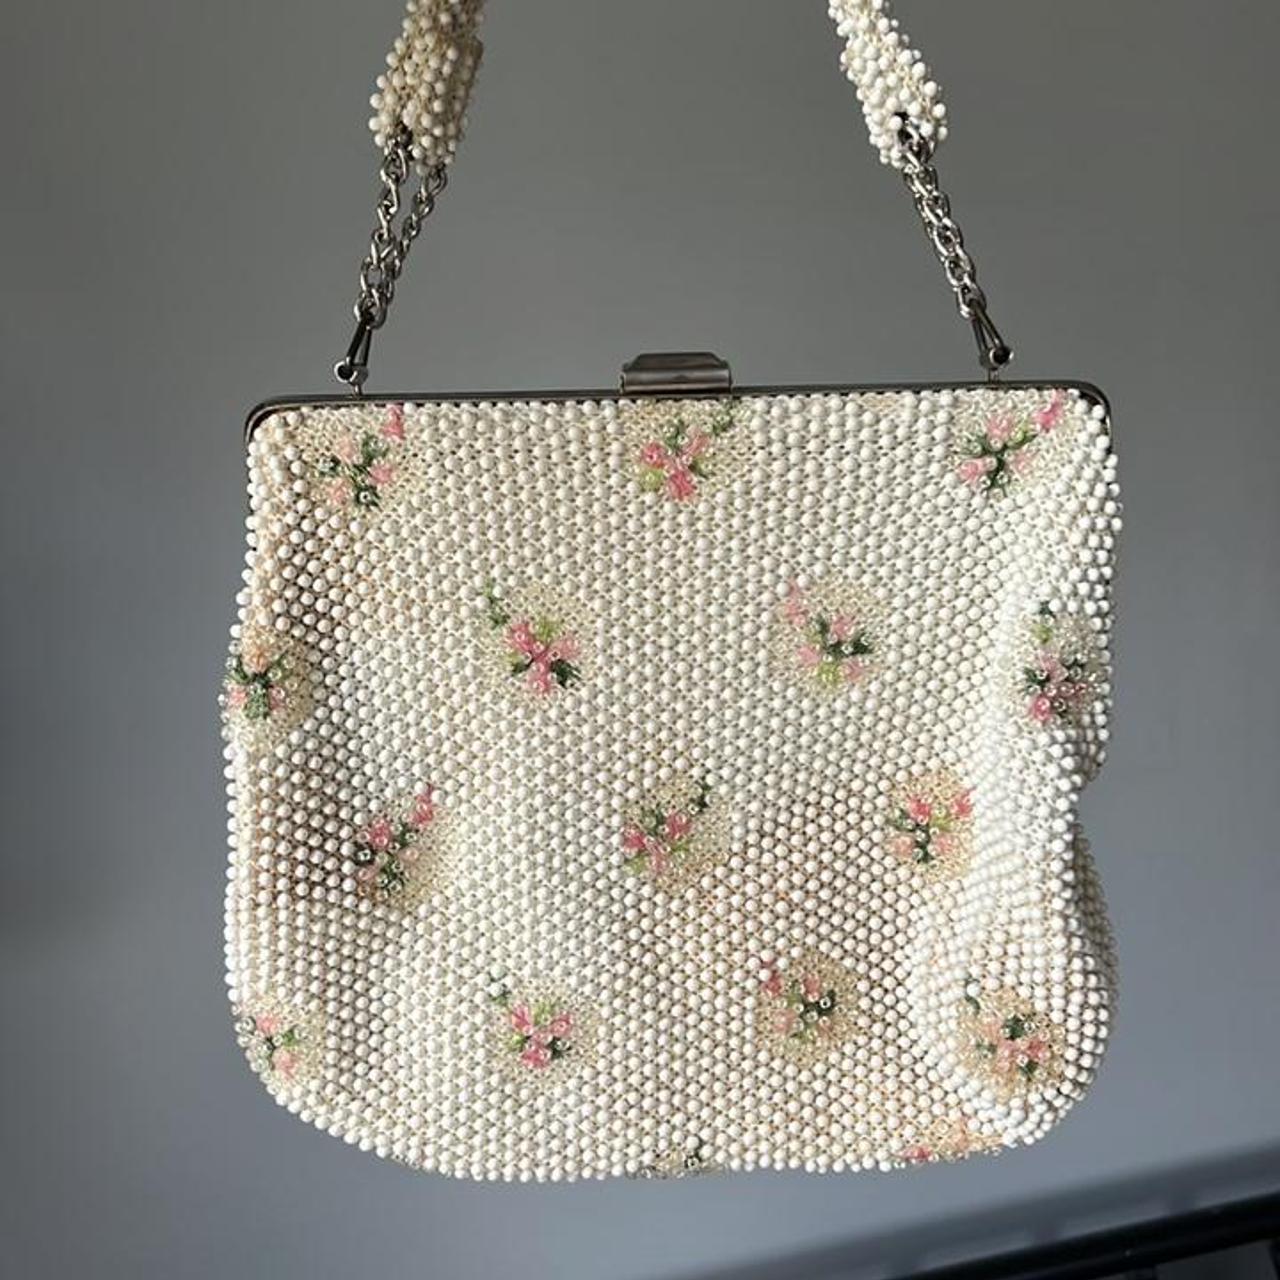 How To Make A Beaded Bag (Free Pattern and Video!) – Fashion Wanderer